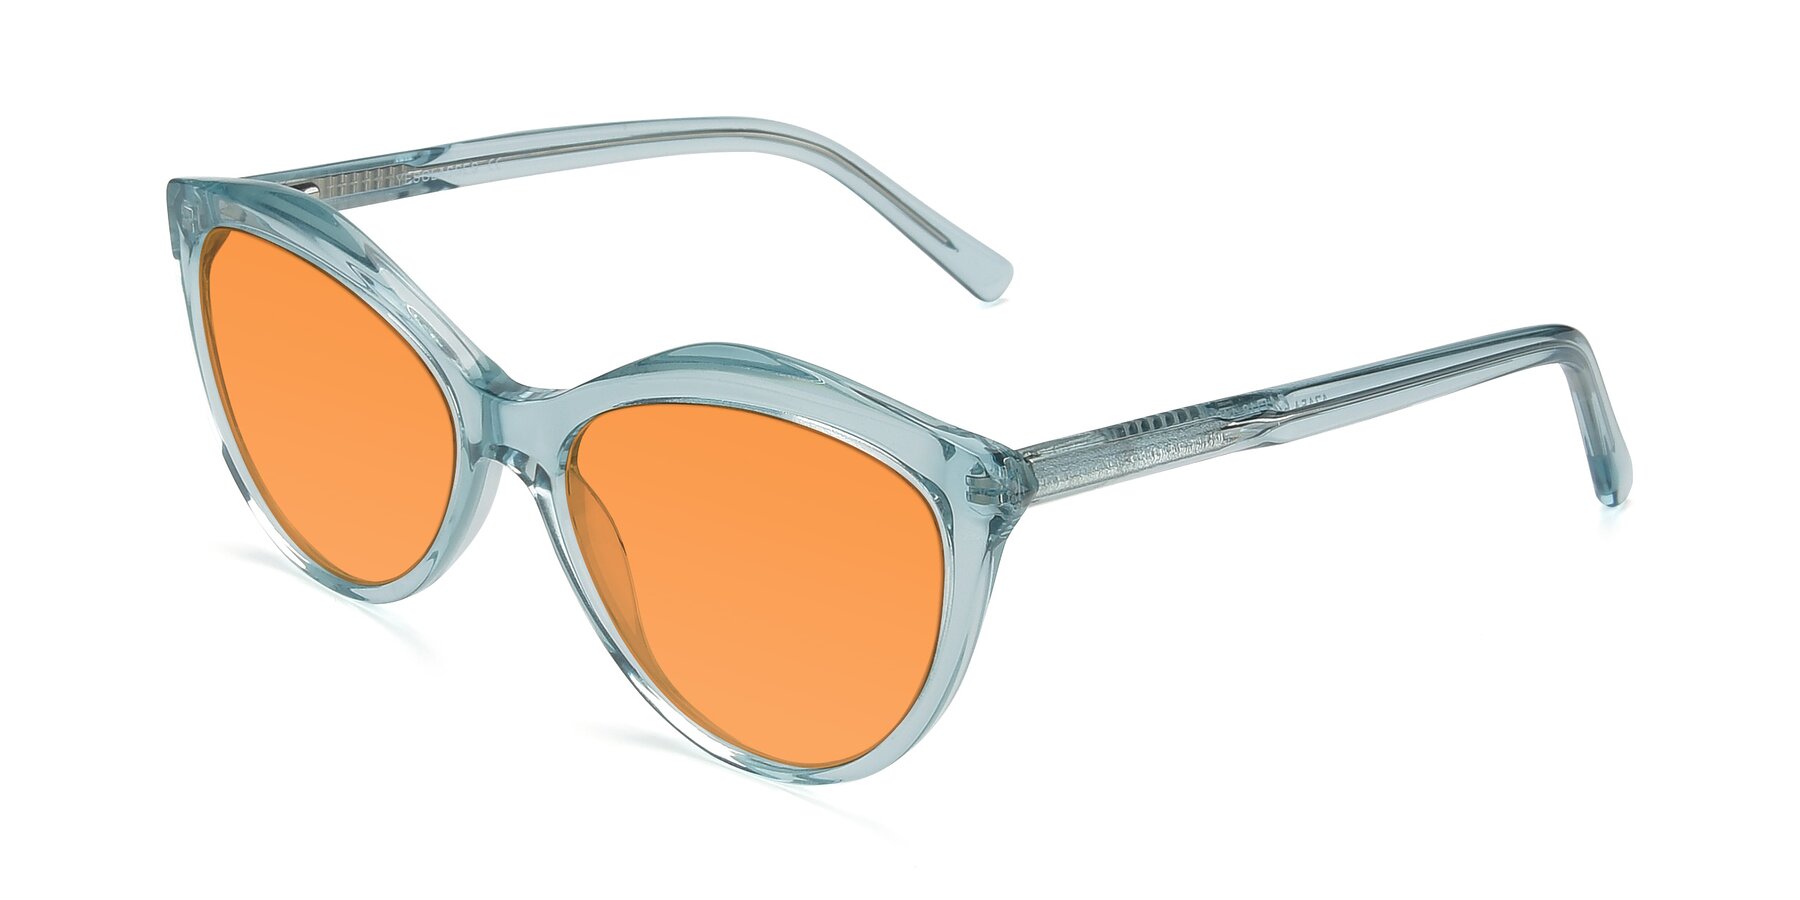 Angle of 17154 in Transparent Green with Orange Tinted Lenses